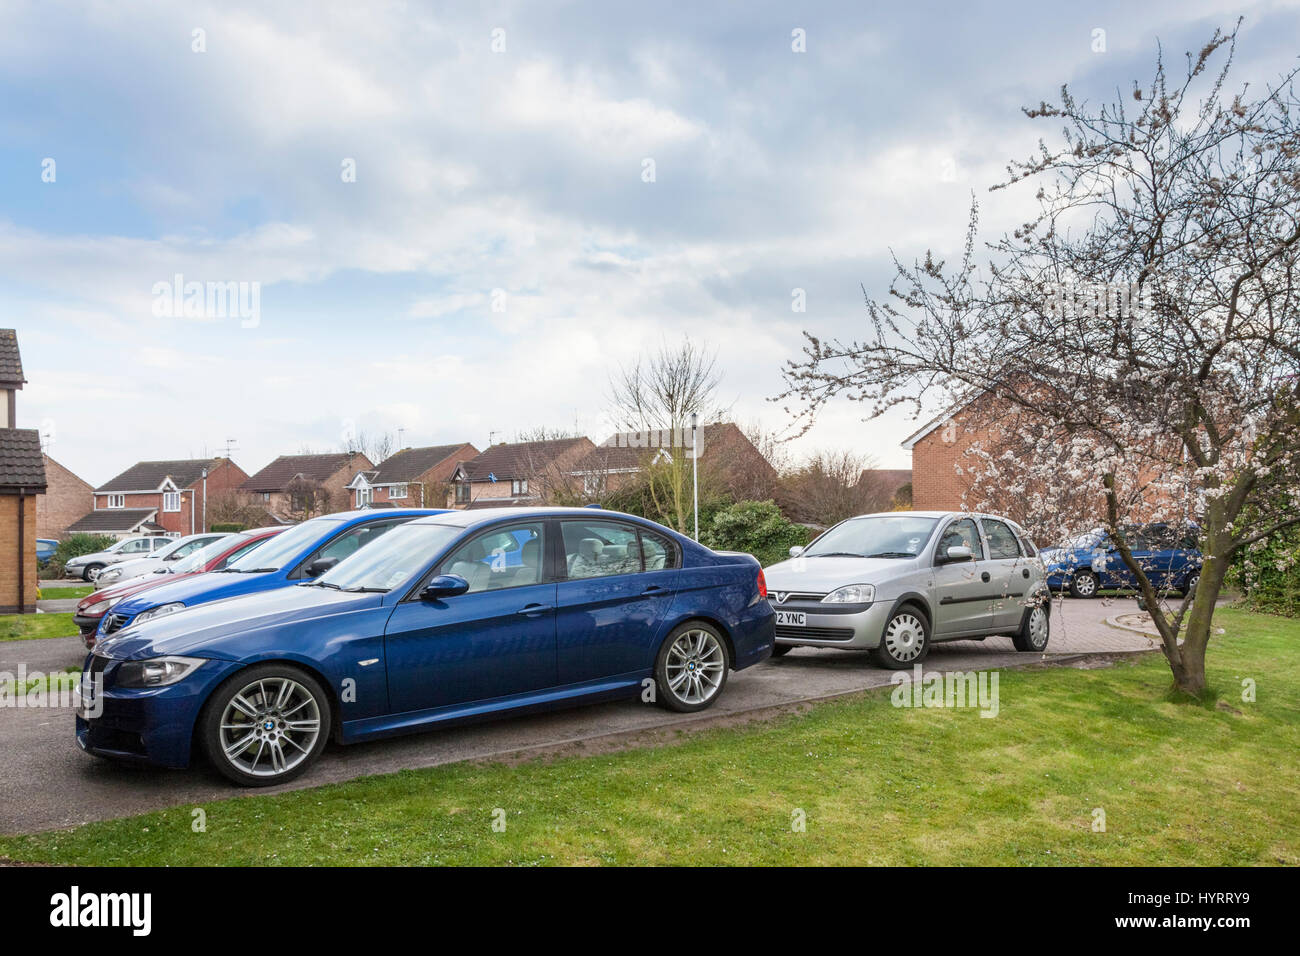 Car ownership. Many cars parked on driveways of a housing estate in Nottinghamshire, England, UK Stock Photo